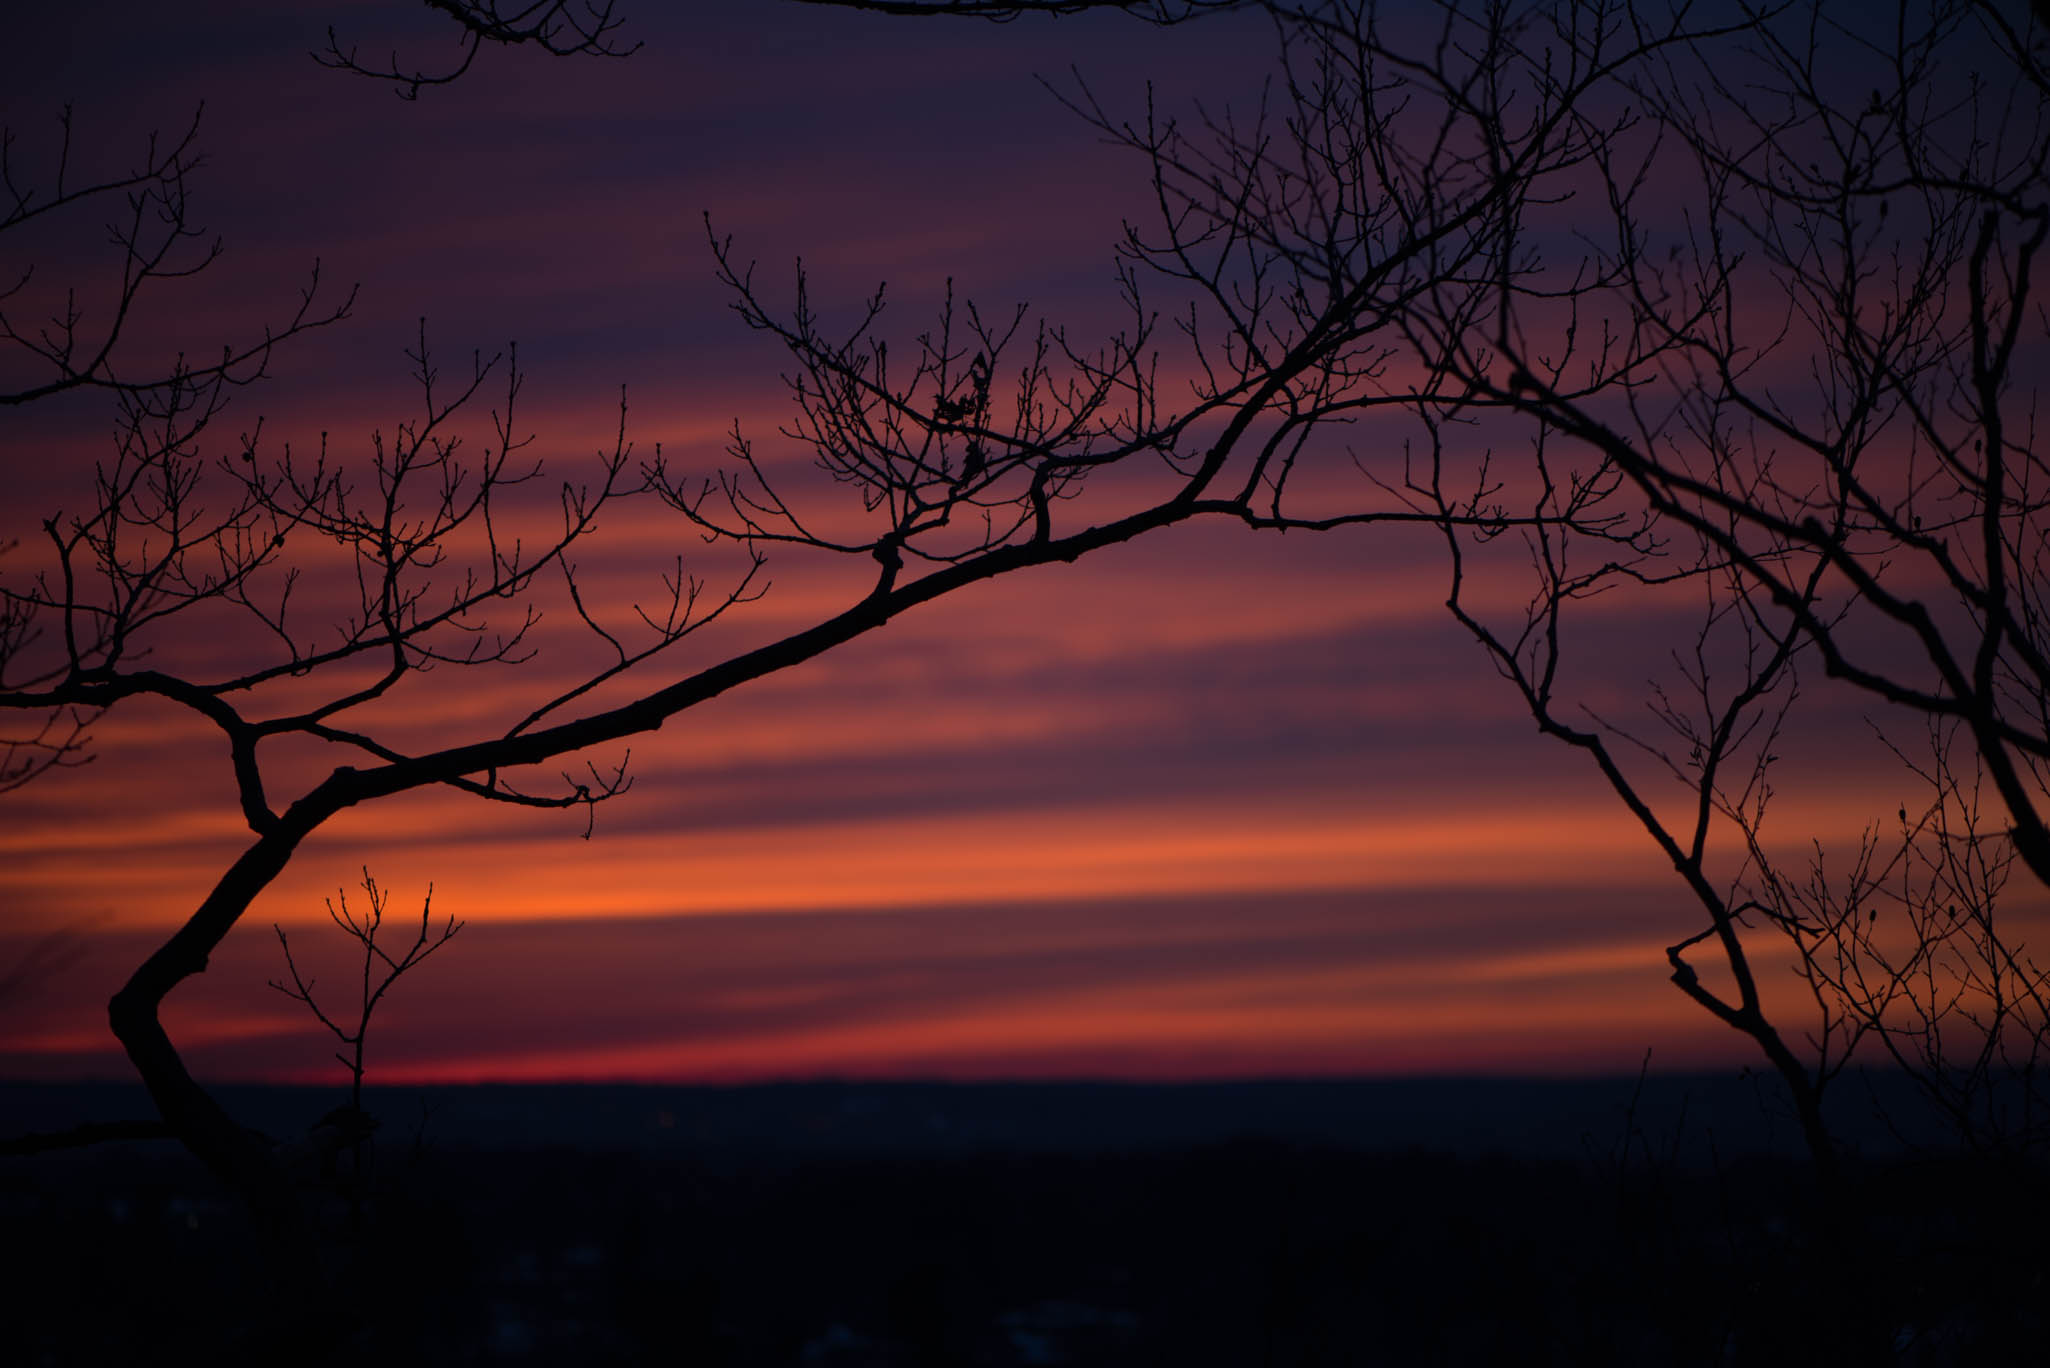 Sunset from East Rock Park in New Haven, Connecticut, USA